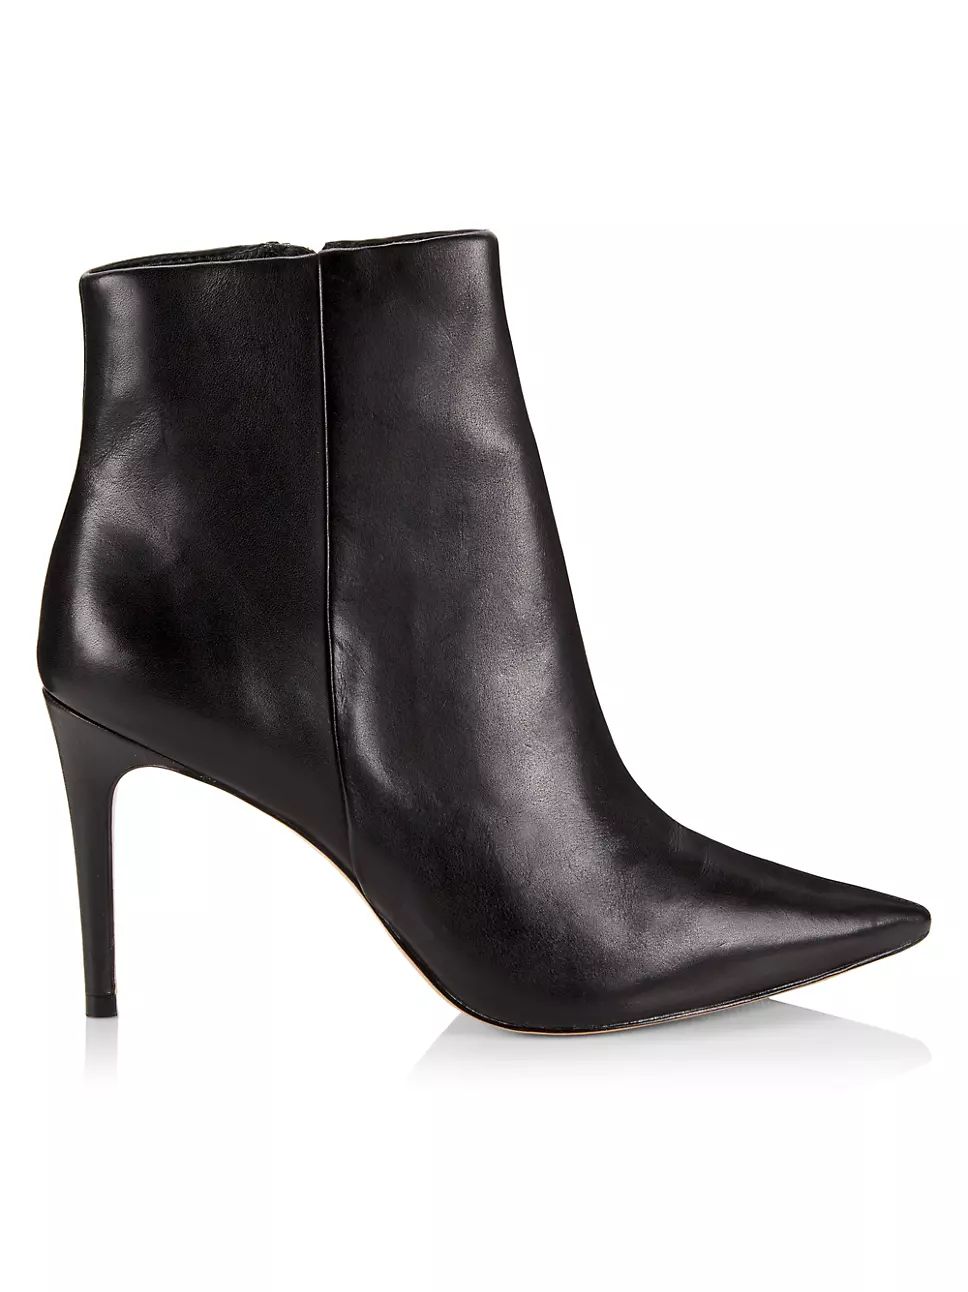 Saks Fifth Avenue COLLECTION 82MM Leather Ankle Boots | Saks Fifth Avenue